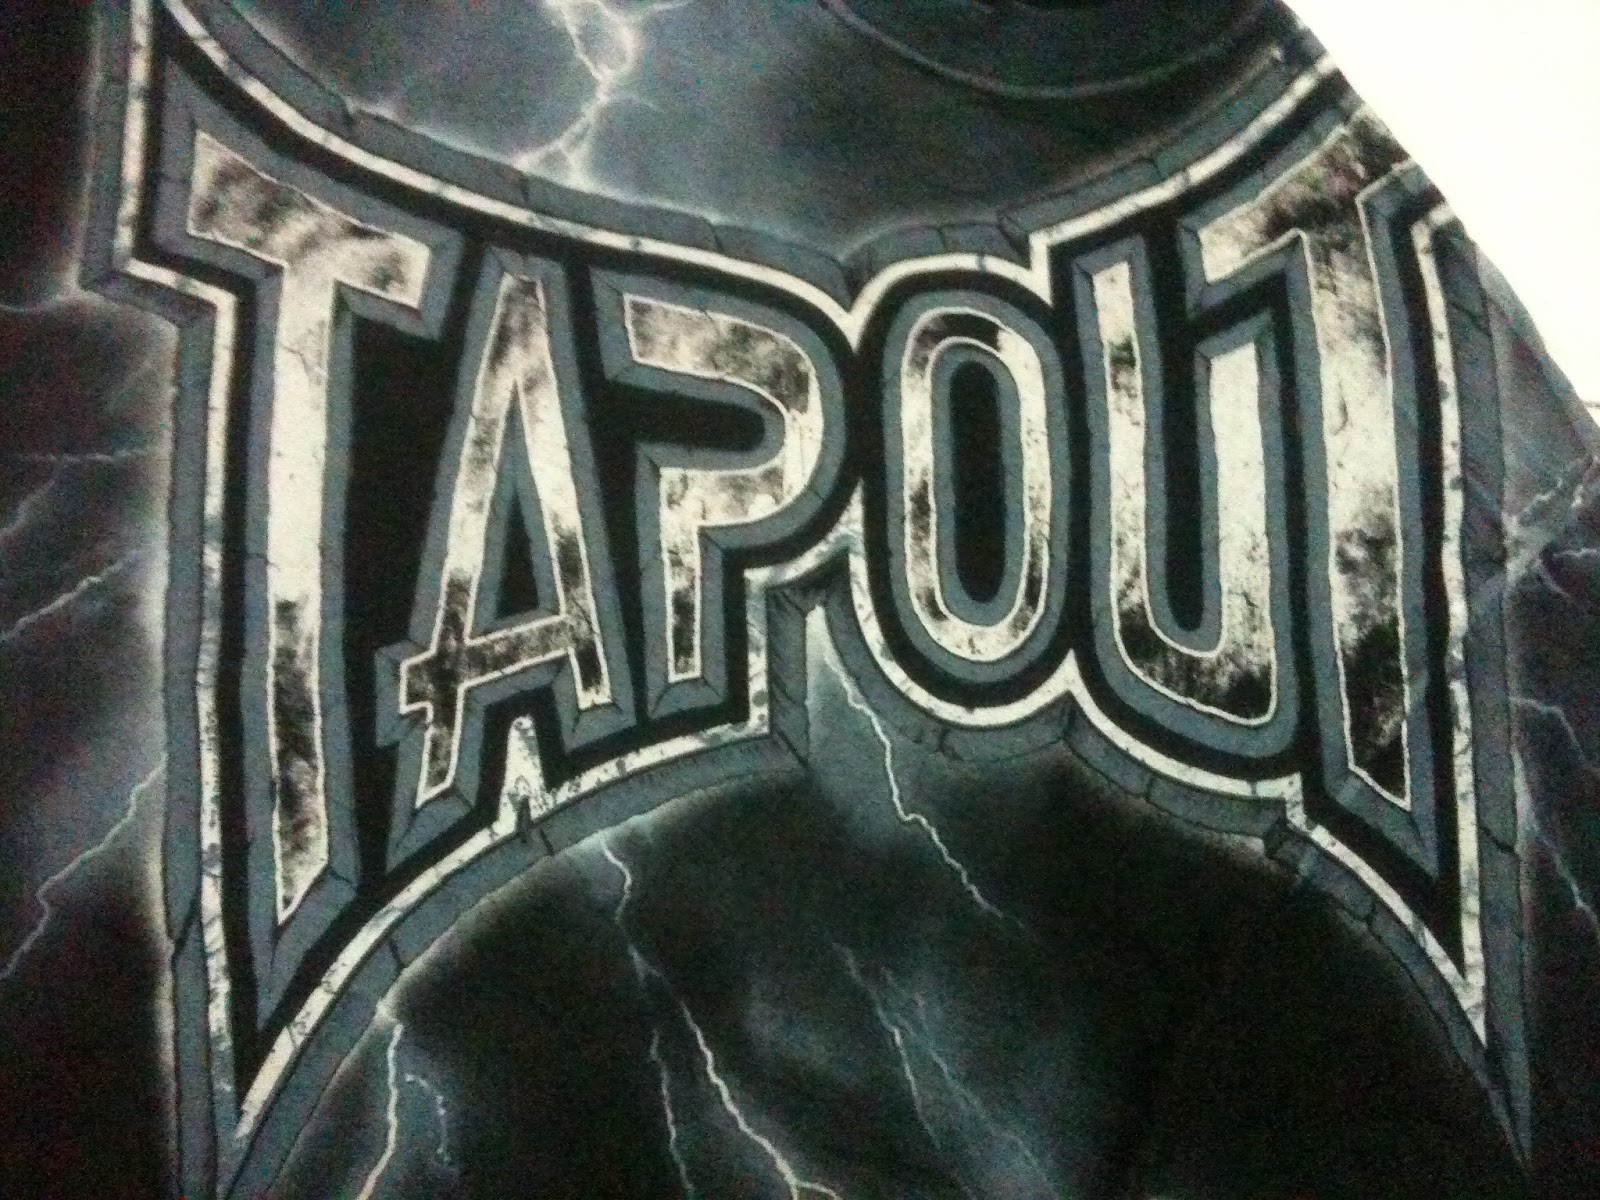 WL-1656) Lighting Strike By Tapout T-Shirt.